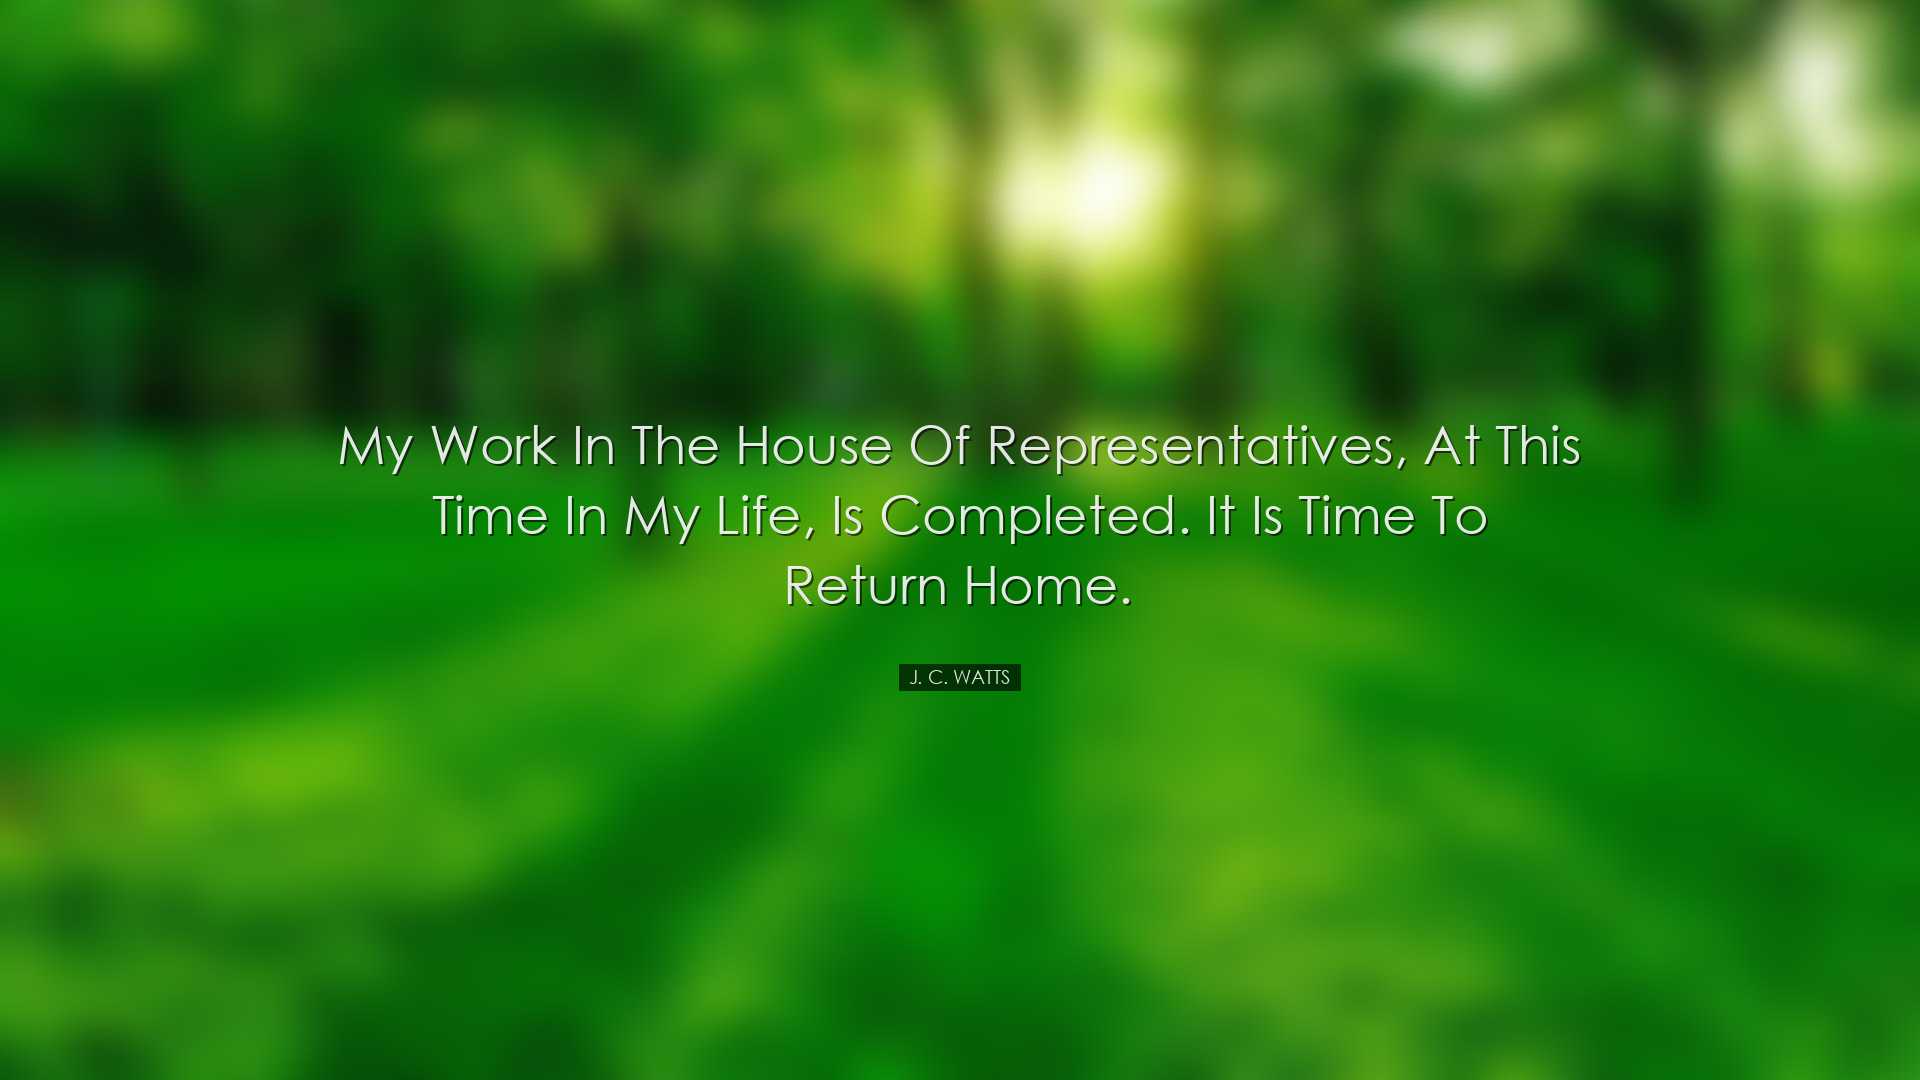 My work in the House of Representatives, at this time in my life,